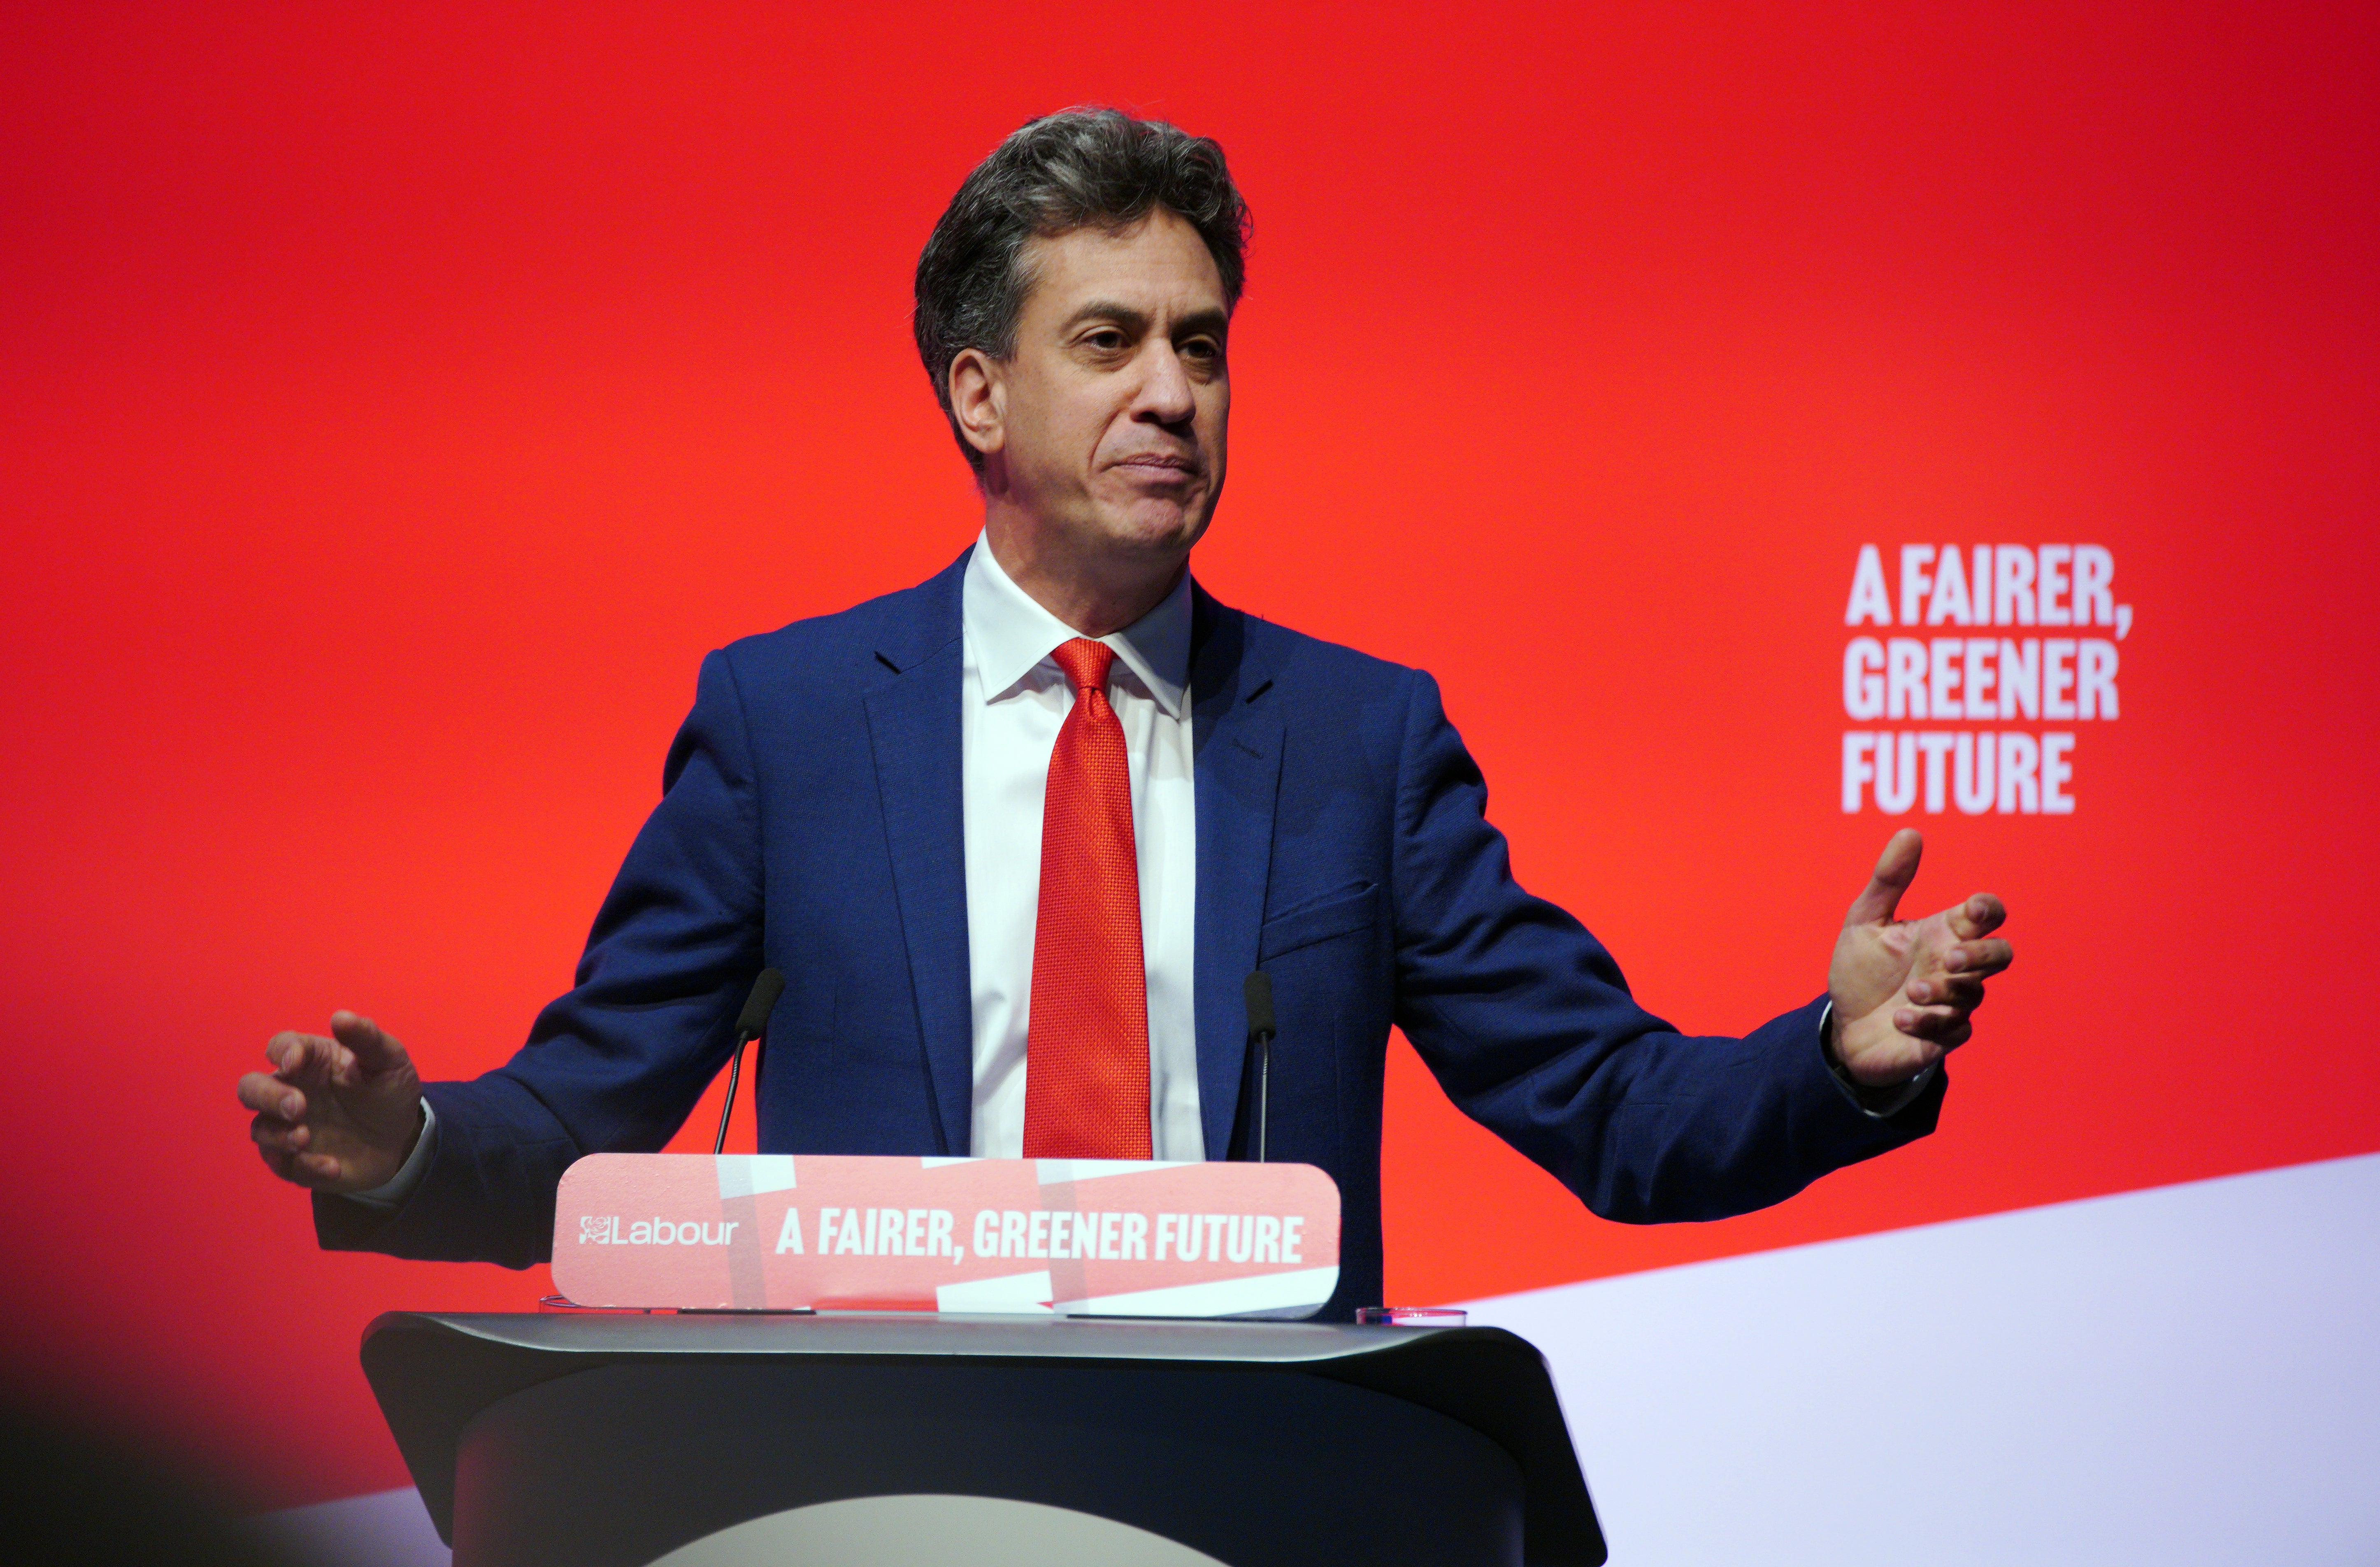 Shadow climate change secretary Ed Miliband Ed Miliband during the Labour Party conference at the ACC Liverpool